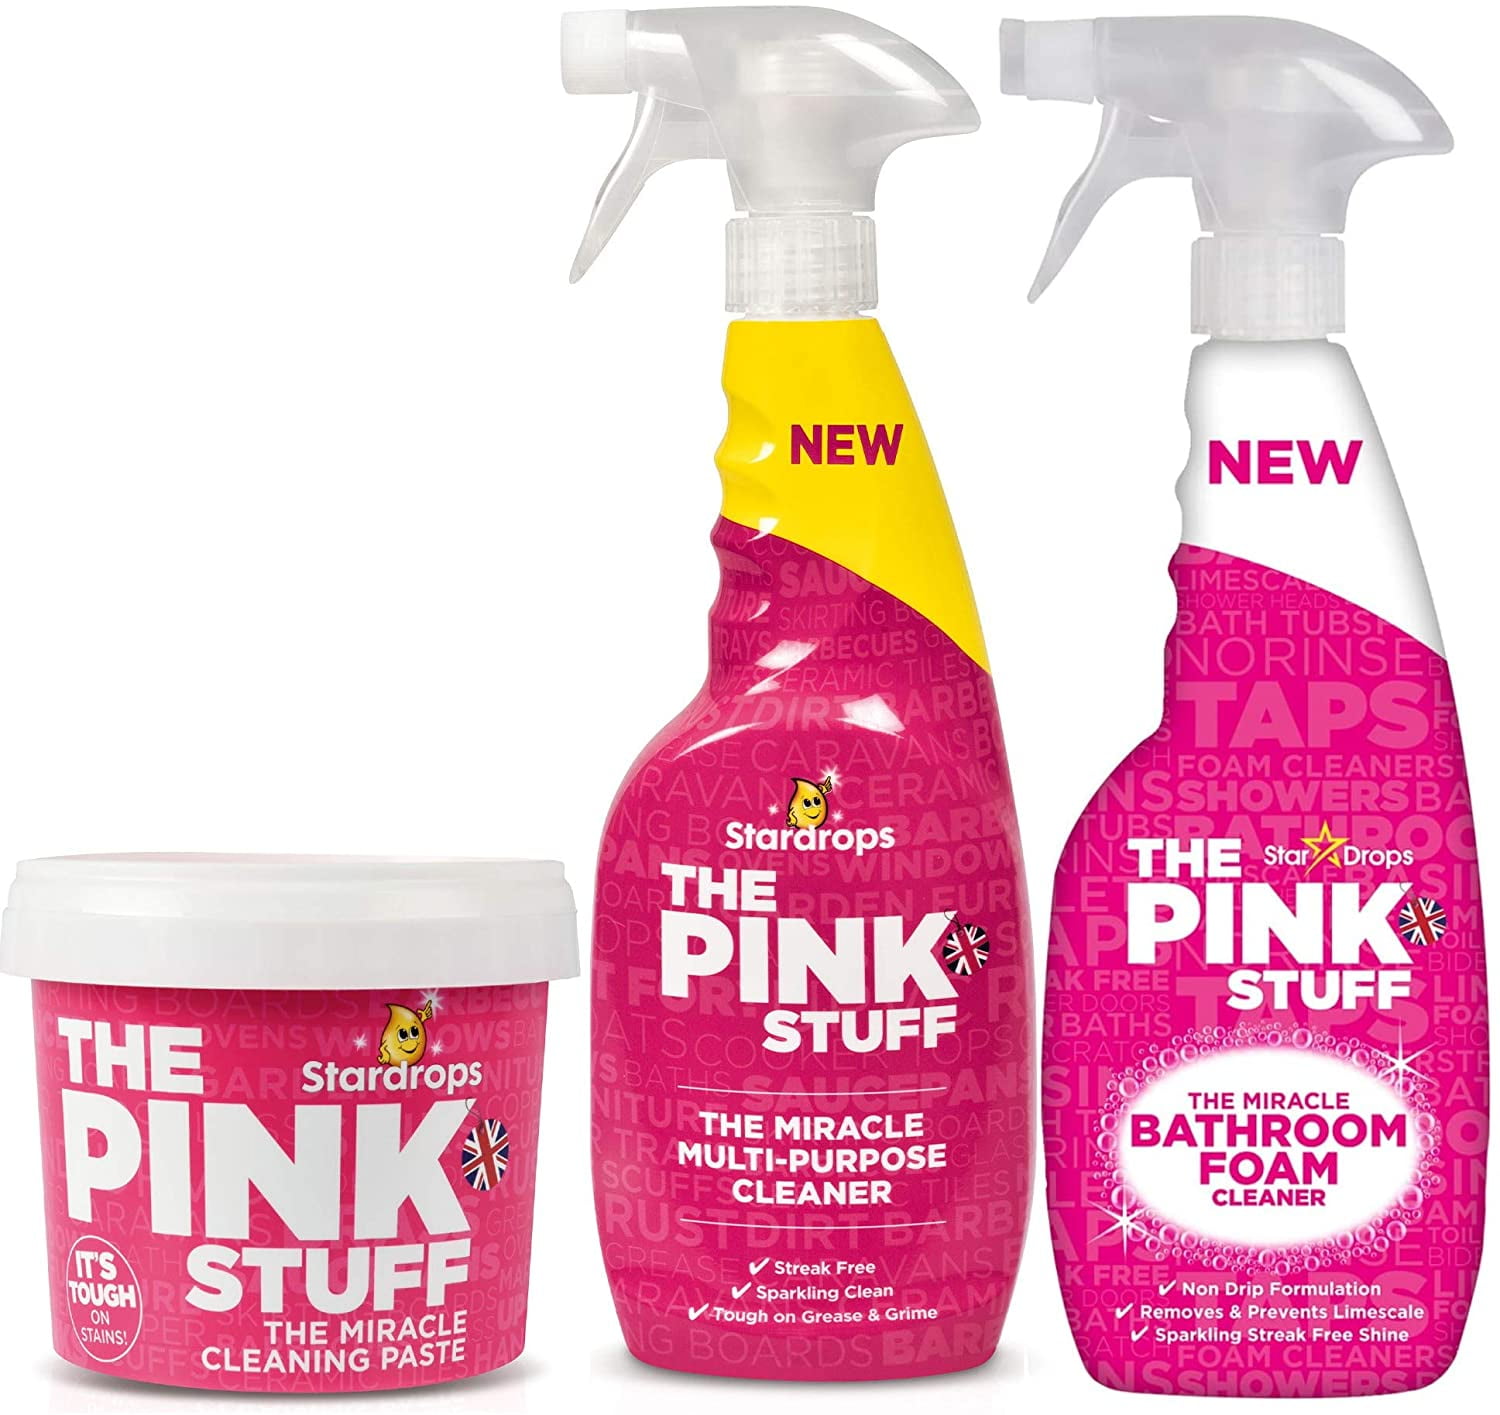 Stardrops - The Pink Stuff - The Miracle Cleaning Paste, Multi-Purpose  Spray, And Bathroom Foam 3-Pack Bundle (1 Cleaning Paste, 1 Multi-Purpose  Spray, 1 Bathroom Foam) 